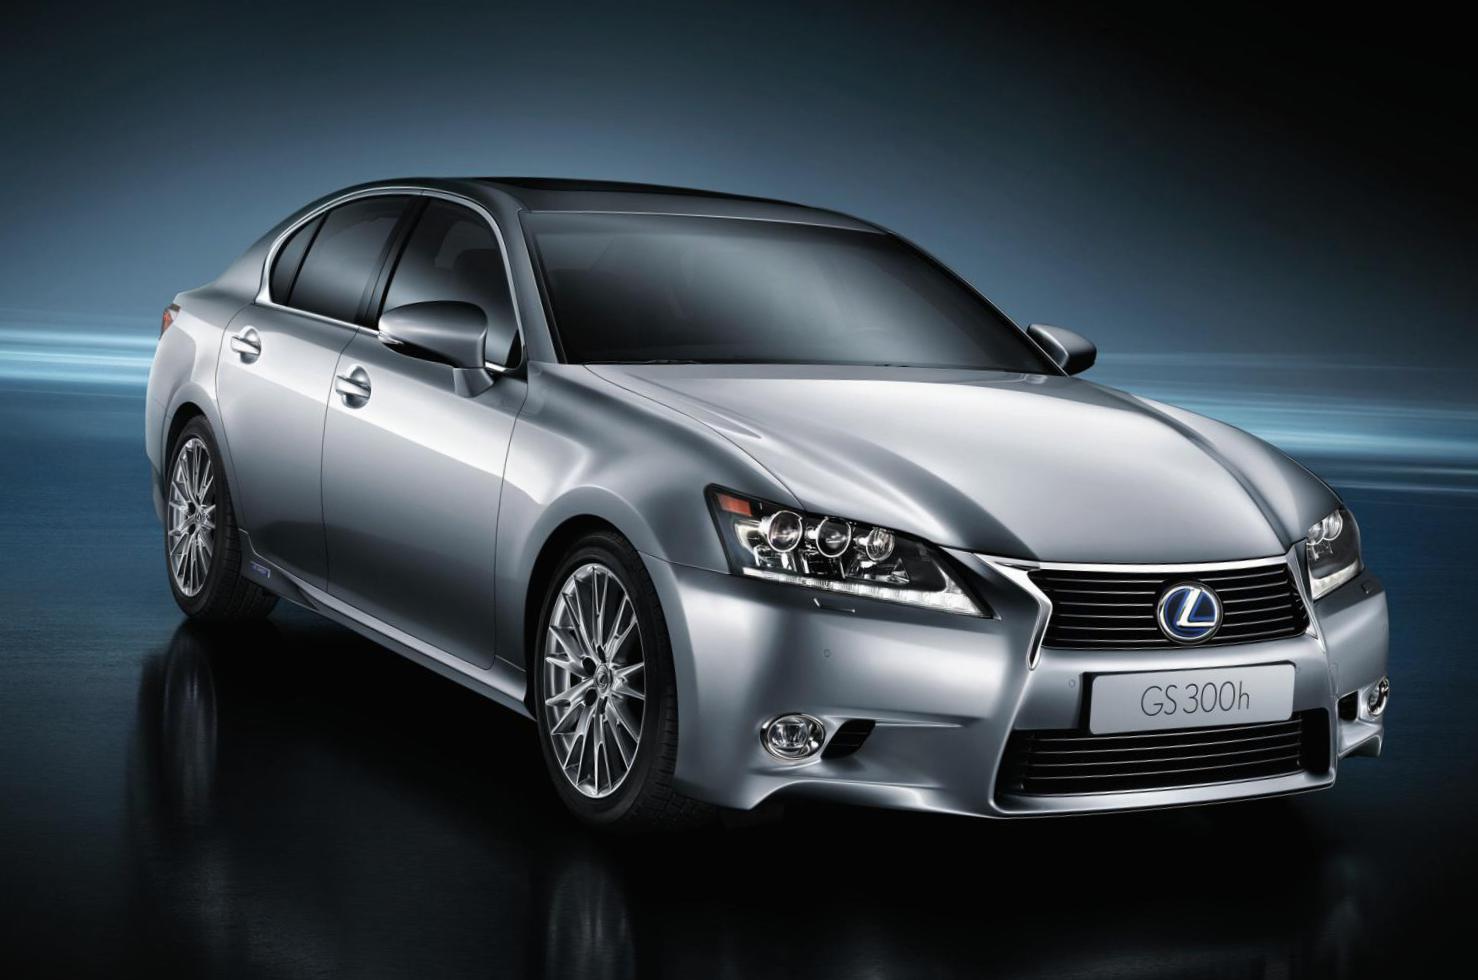 IS 300h Lexus Specification coupe